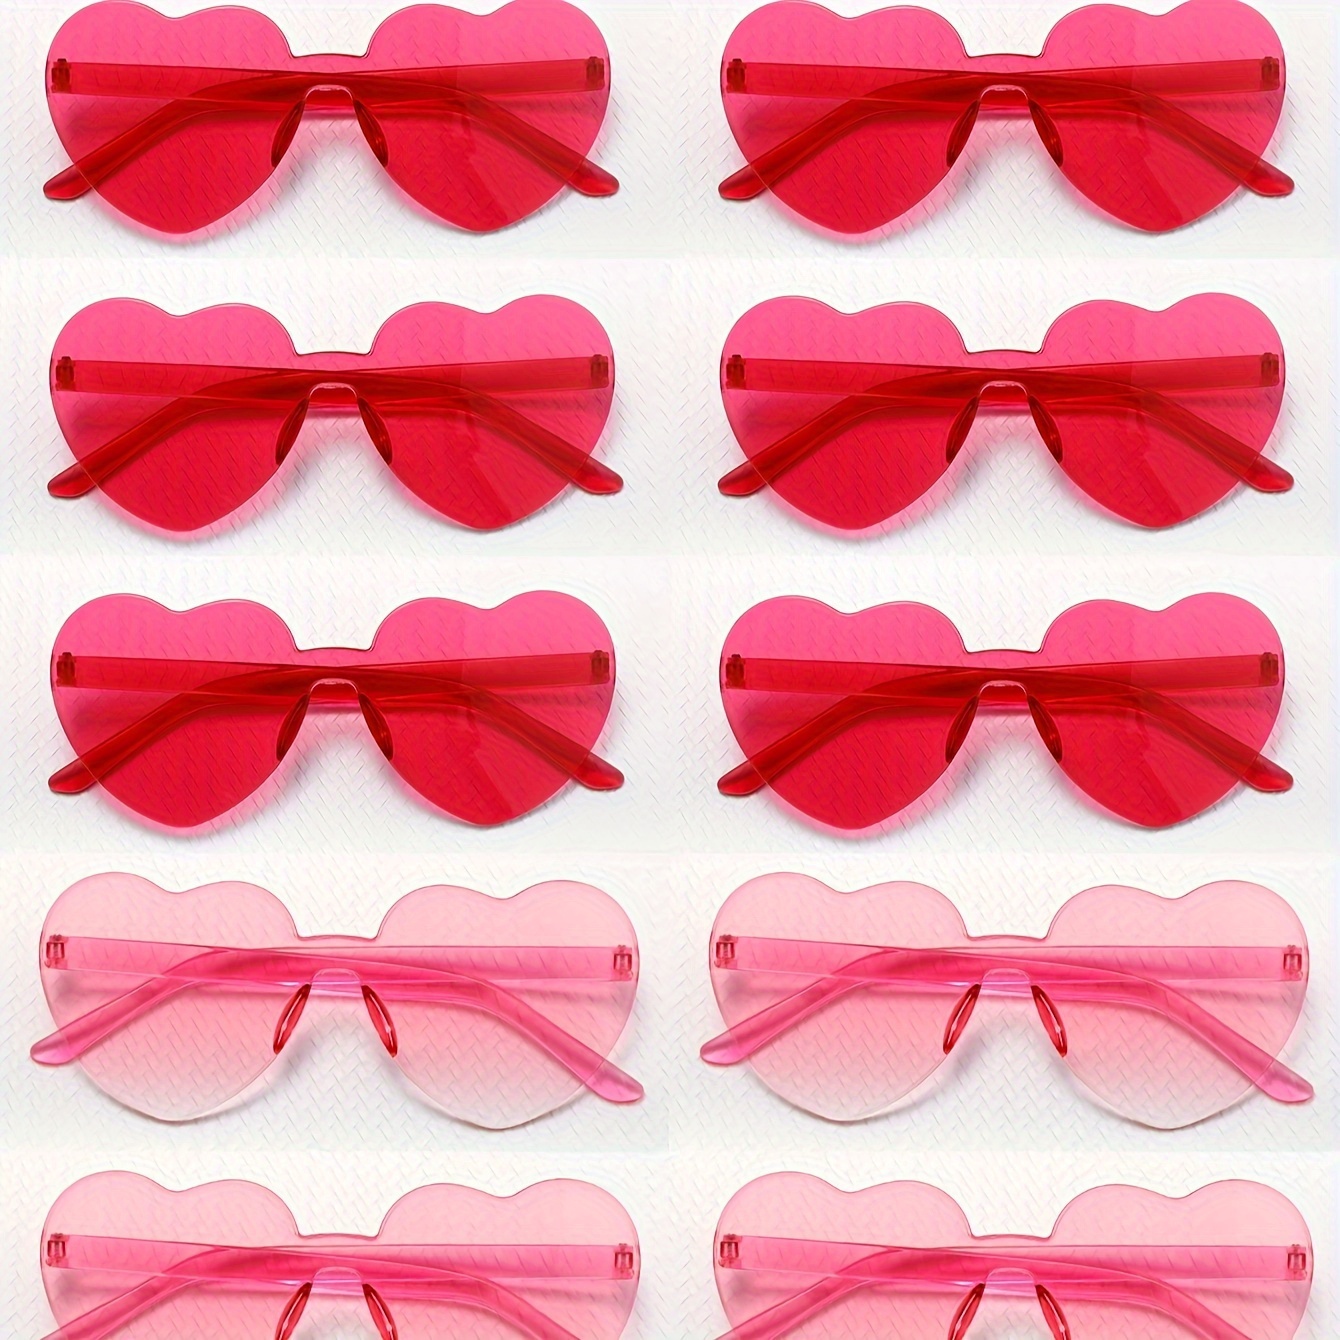 

12pcs Heart Shaped For Women Men Candy Color One-piece Decorative Shades For Wedding Party Beach Prom Fashion Glasses For Music Festival